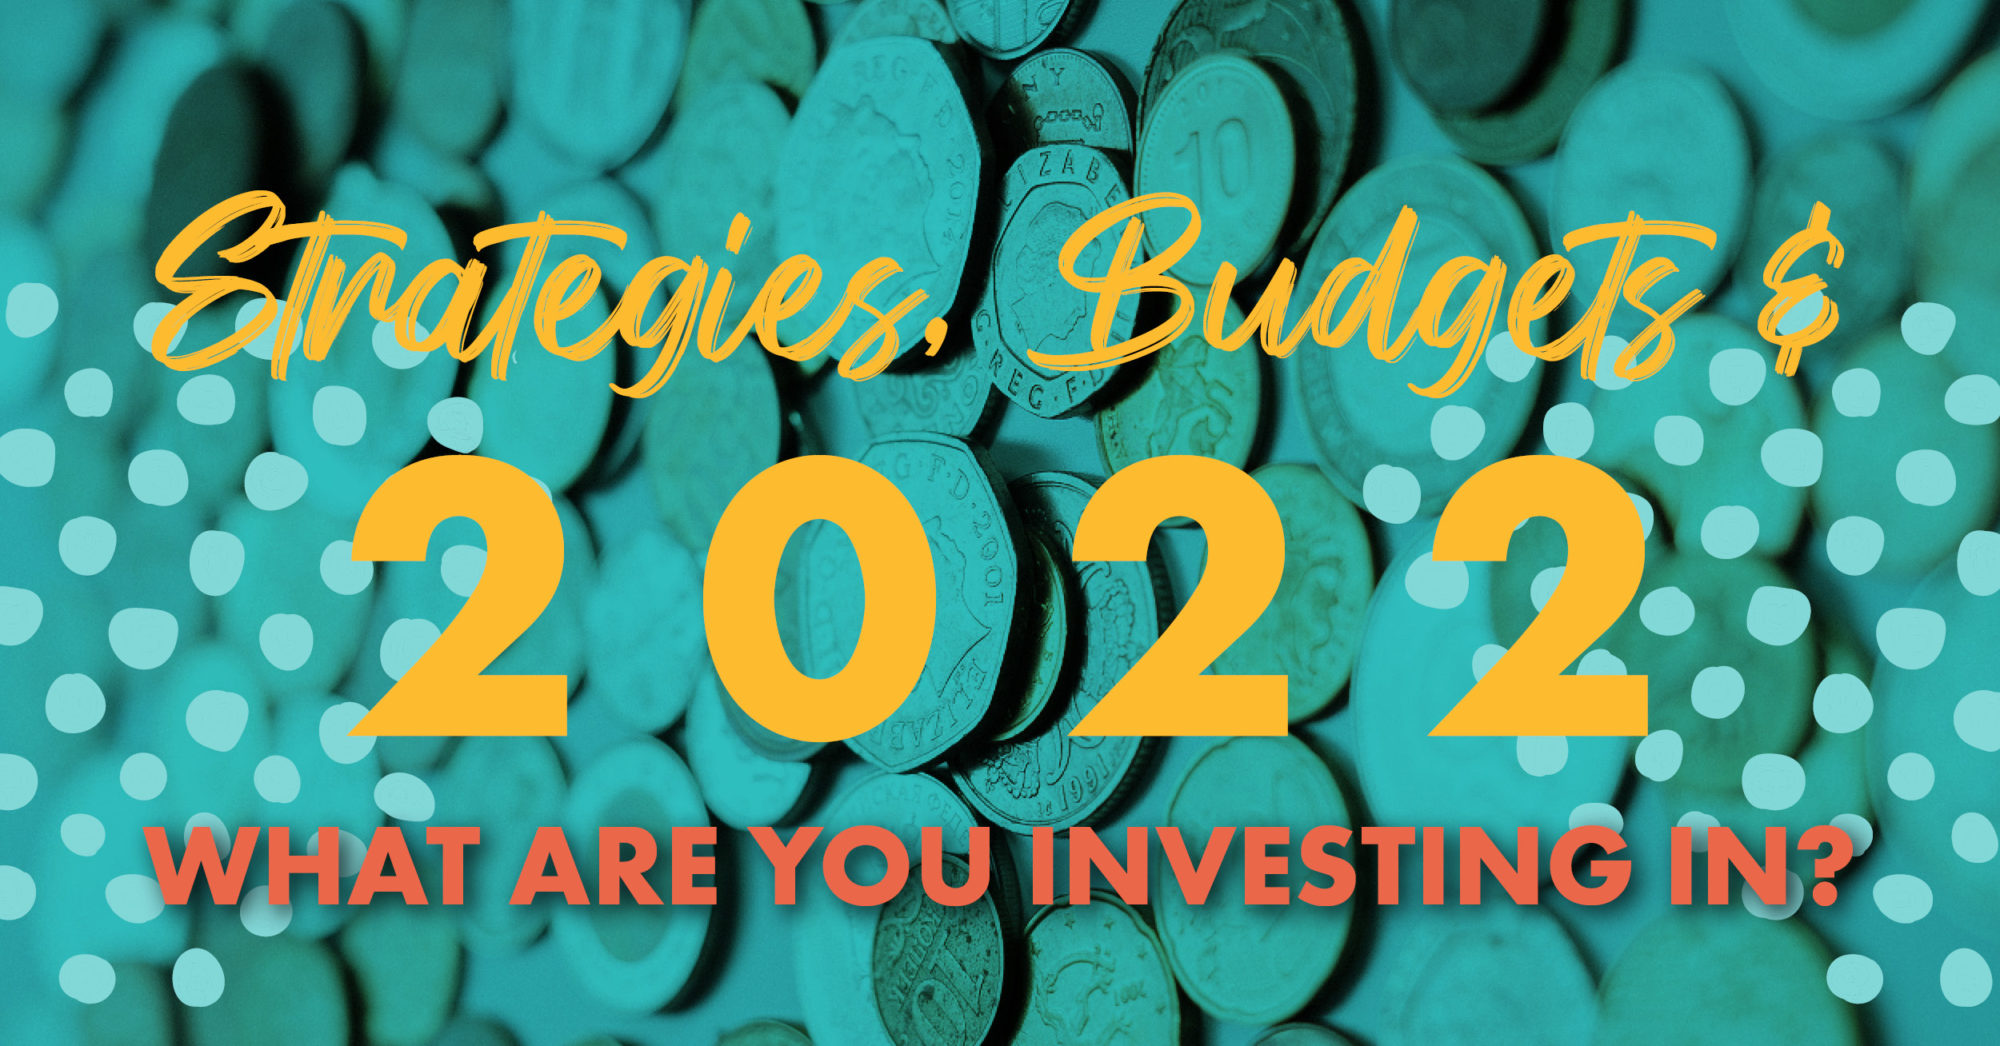 Strategies, Budgets & 2022 - What Are You Investing in?